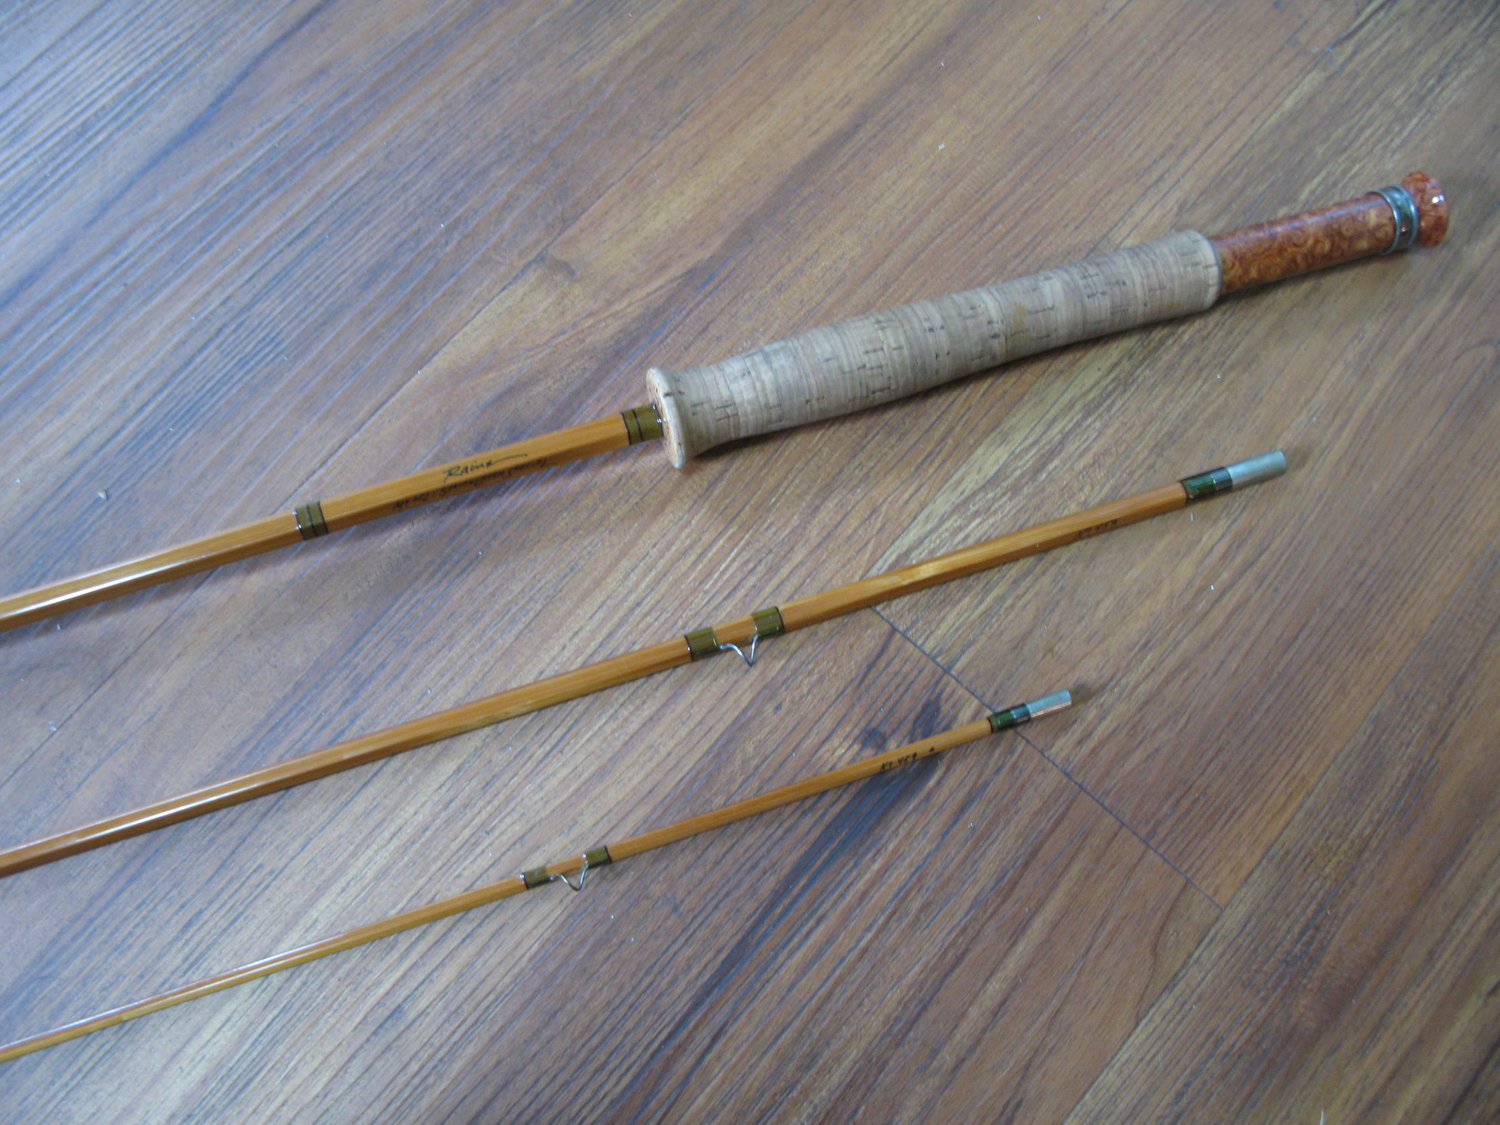 Portions of a beautifully crafted Raine bamboo fly rod.